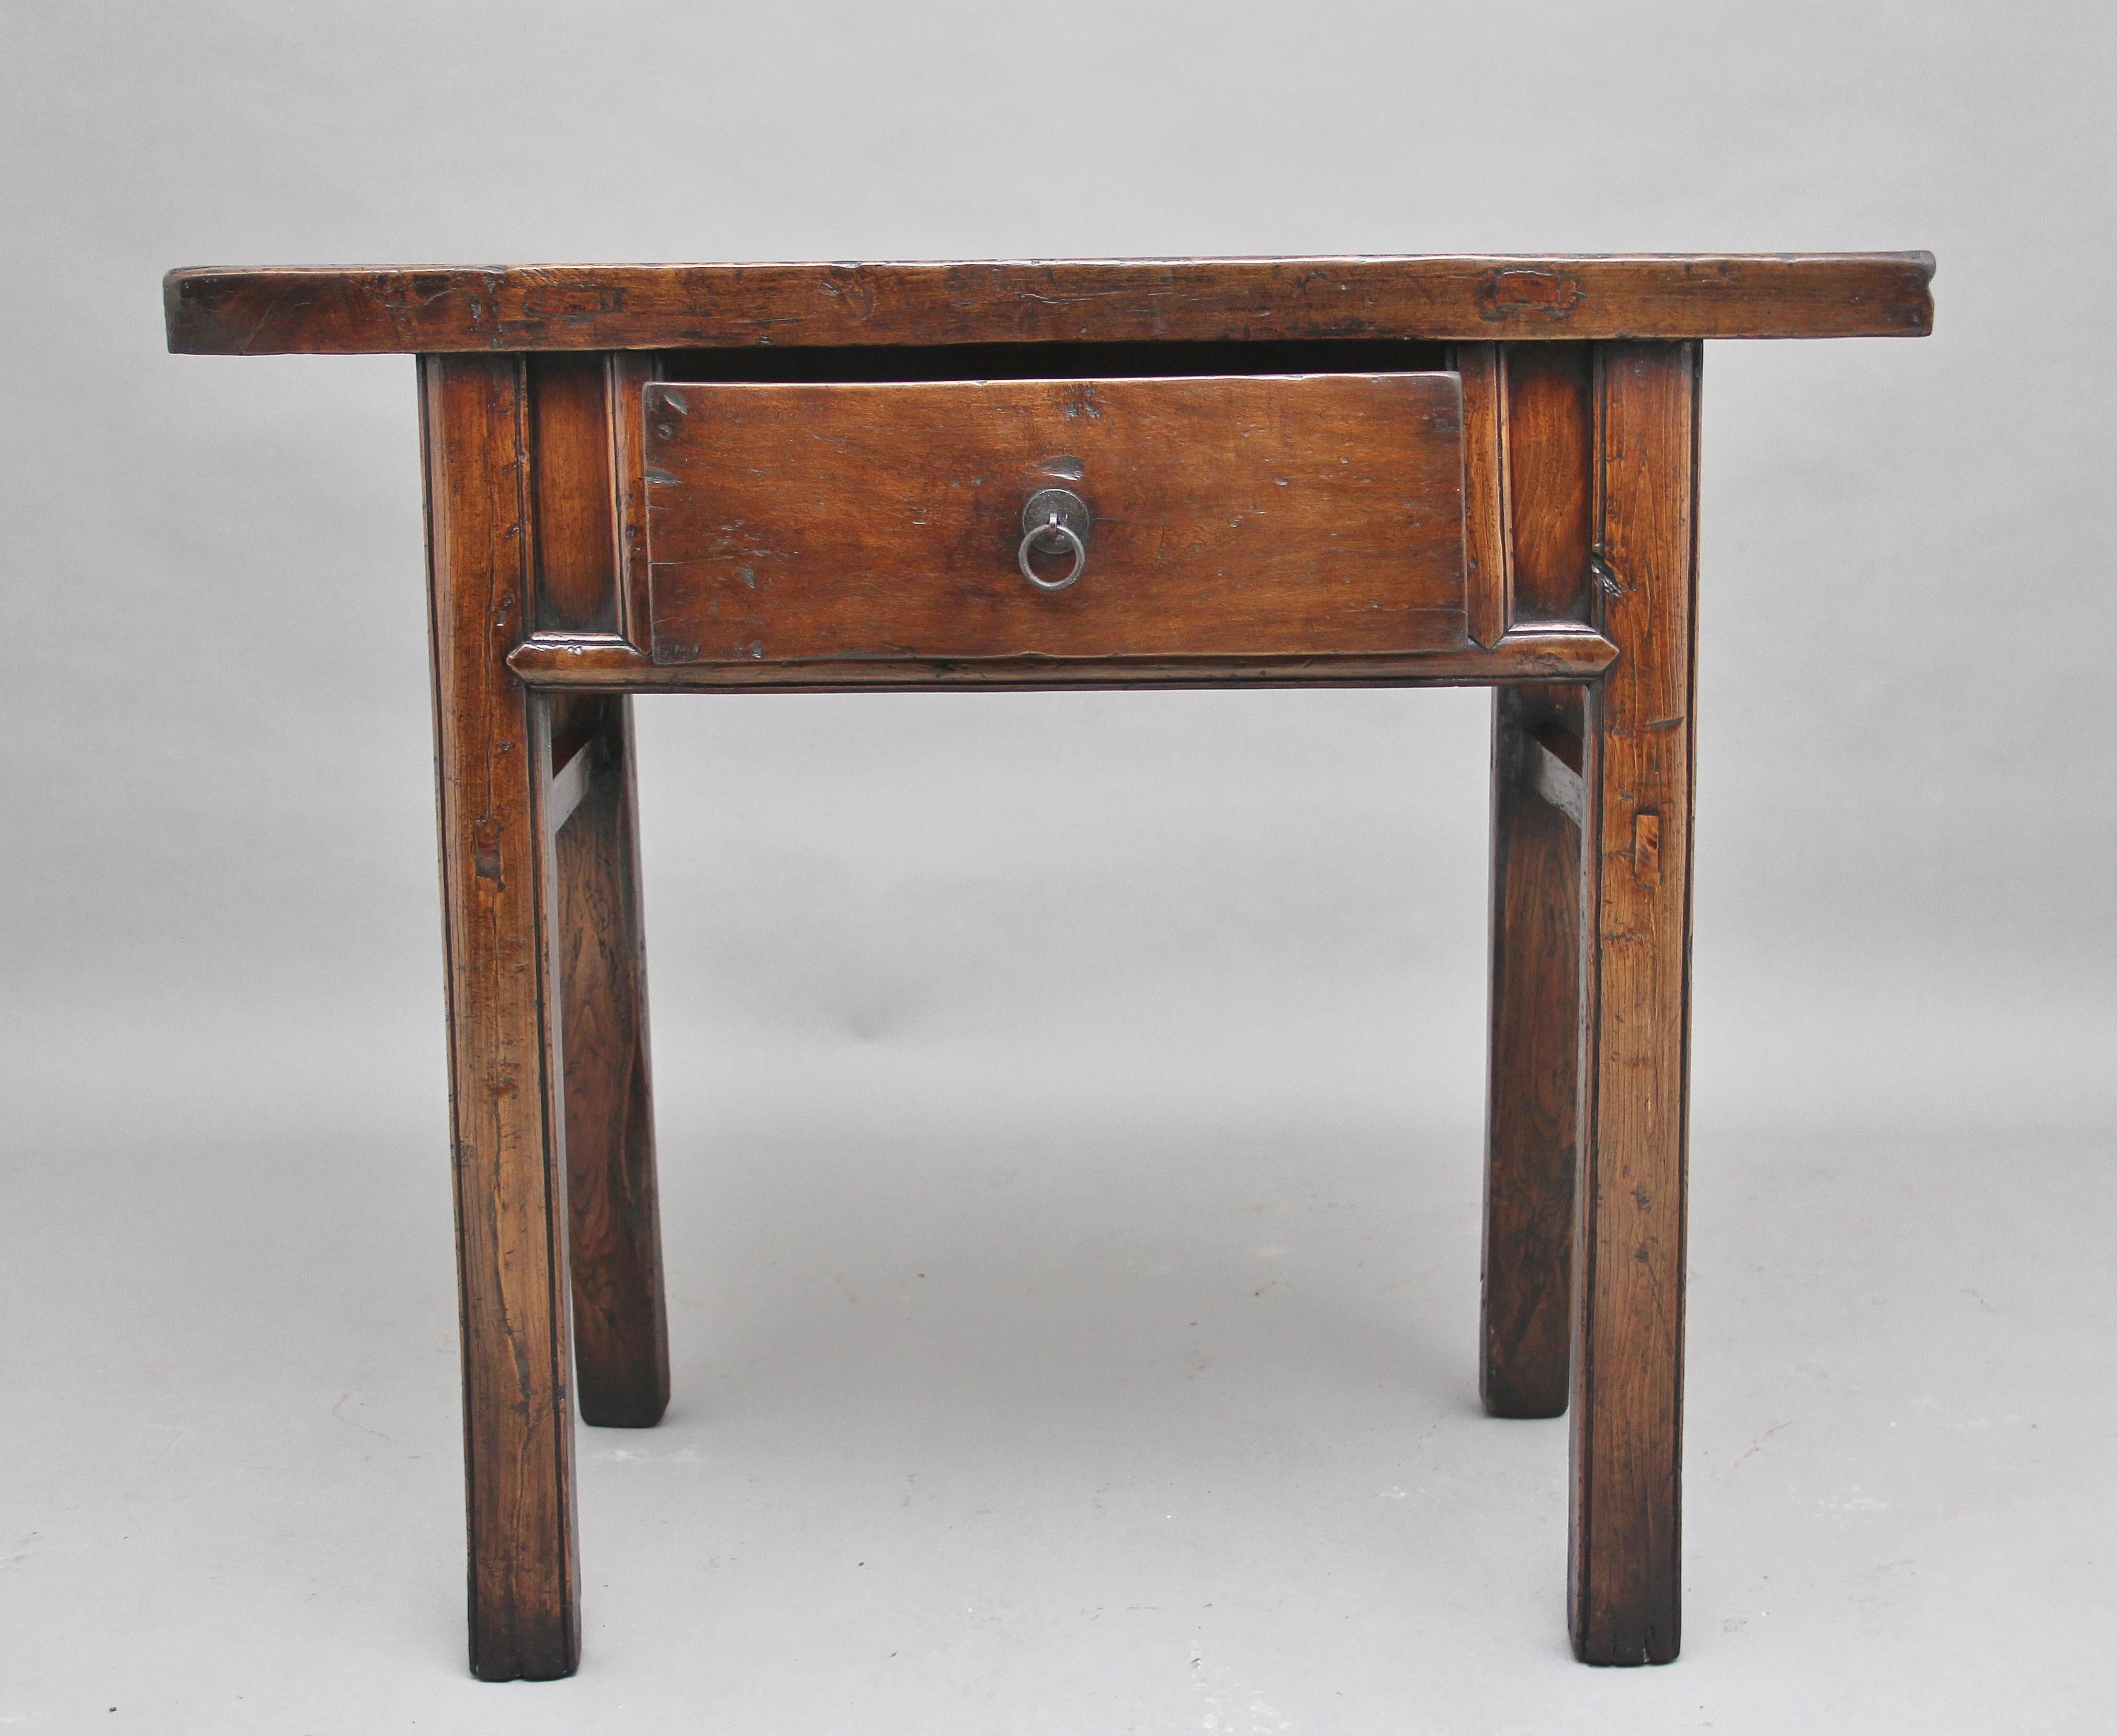 19th century Chinese elm side table with a nice rustic looking top above a single drawer with original brass ring handle, standing on square legs united with side stretchers. Lovely color and in excellent condition, circa 1880.